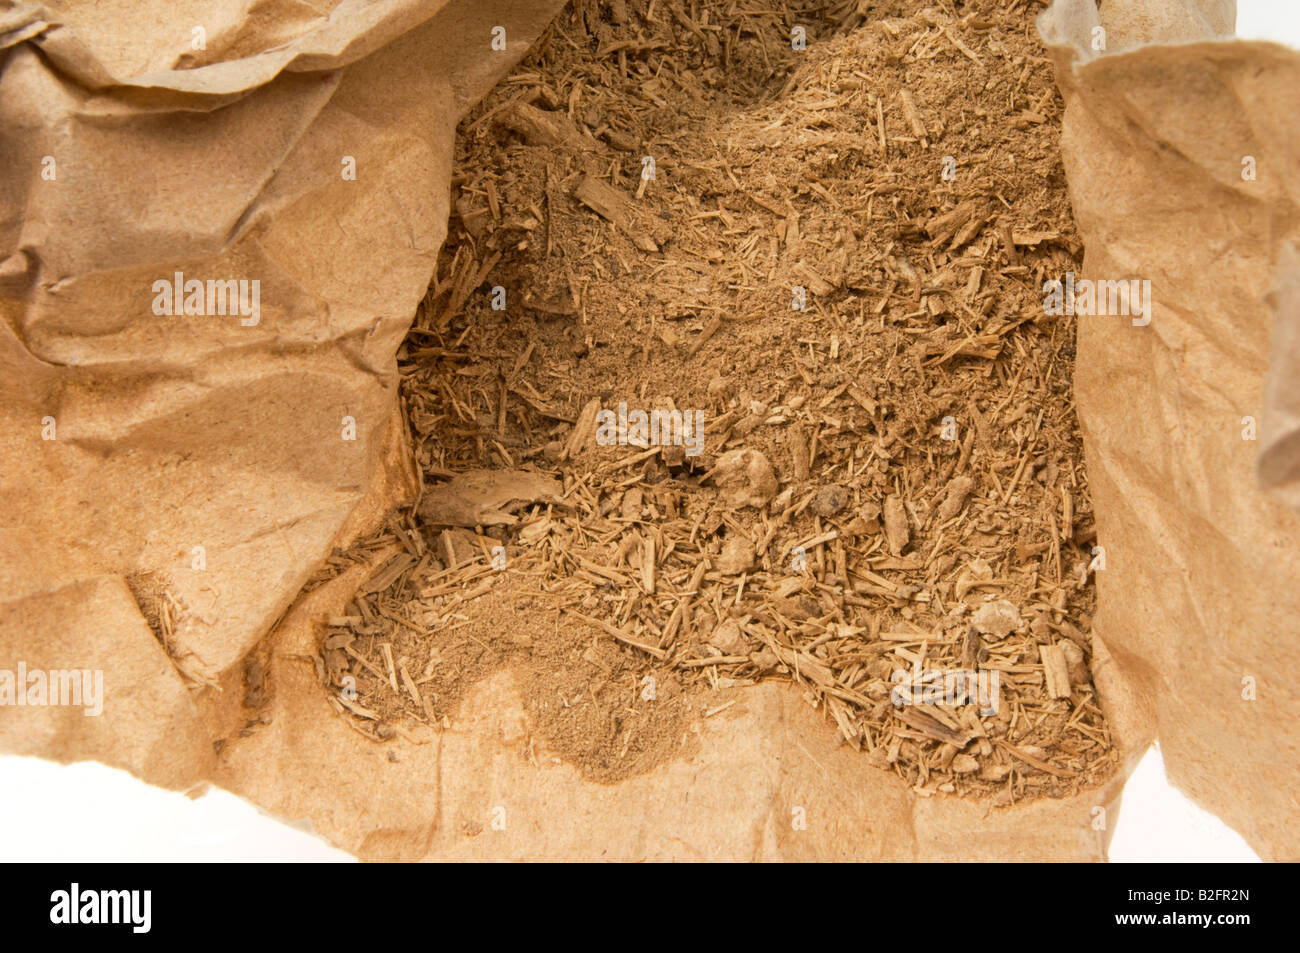 Kava from the southsea KAVA POWDER Kawa Piper methysticum Rauschpfeffer Medicinal plant dried root hachkled root Stock Photo